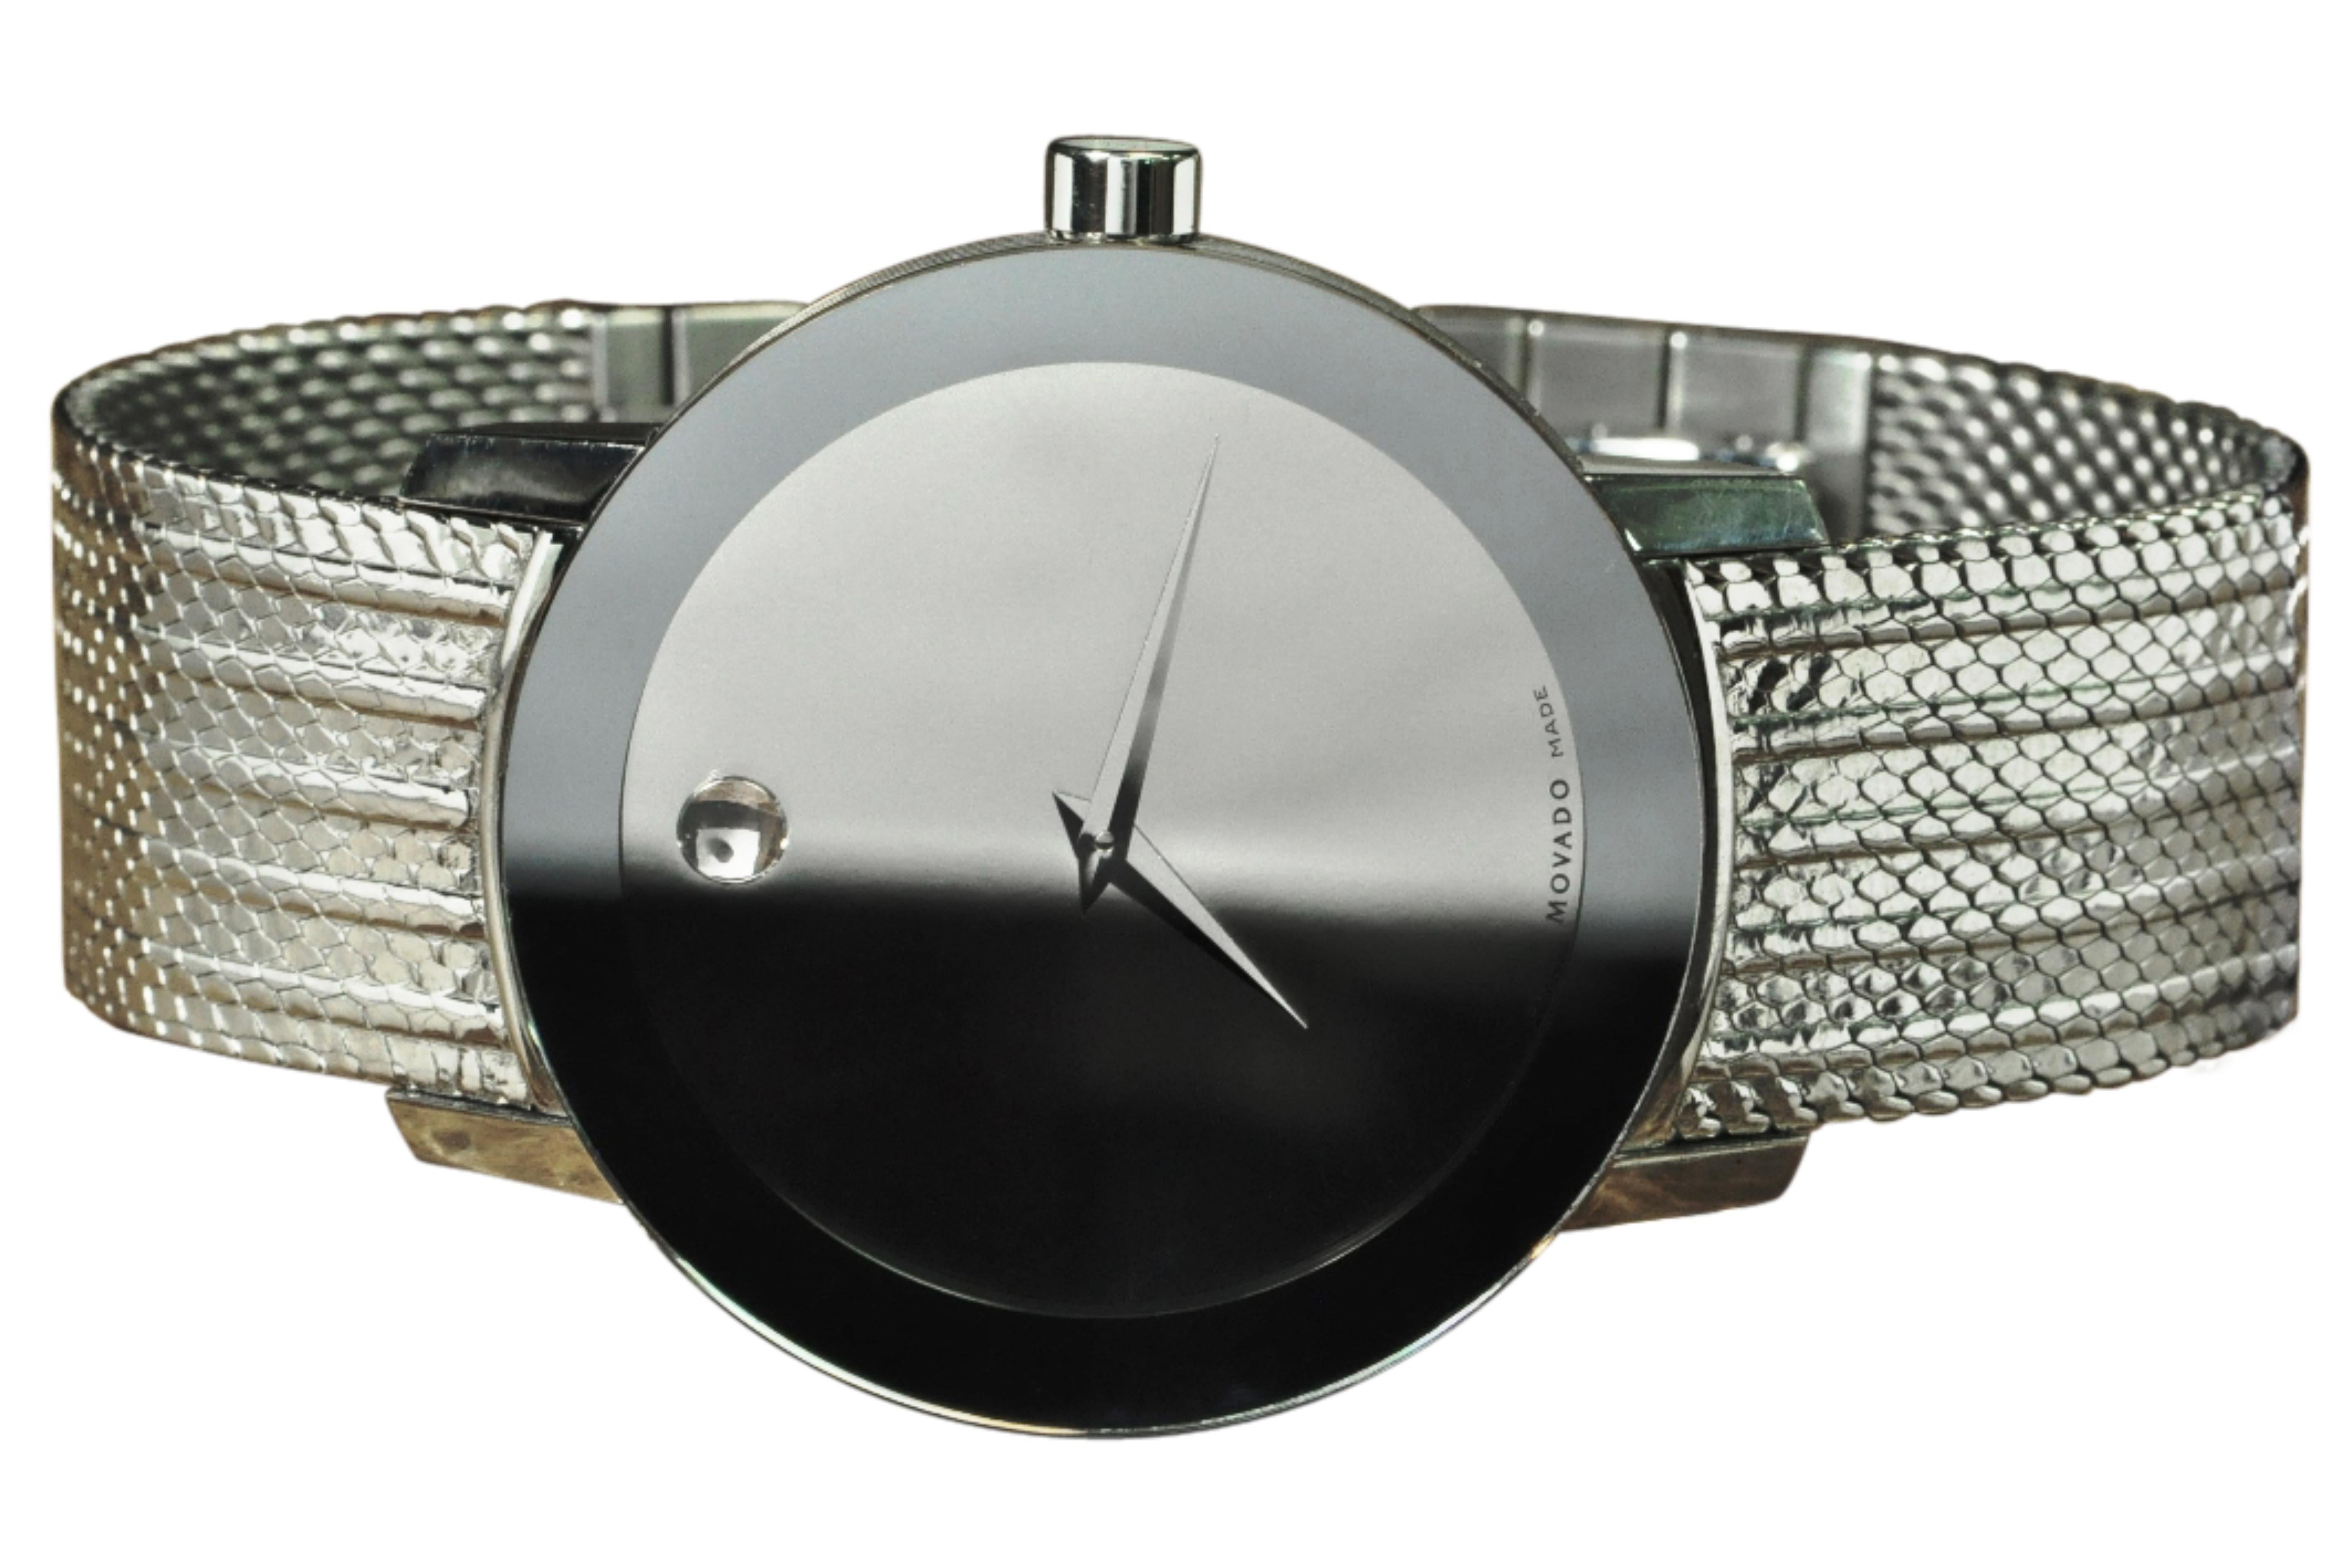 This captivating Movado Concept 60 men’s watch is powered by a Swiss Quartz movement encased in a stainless-steel body. The clasp of the watch utilizes a dual pushbutton deployment clasp for secure opening and closing. The round watch face is